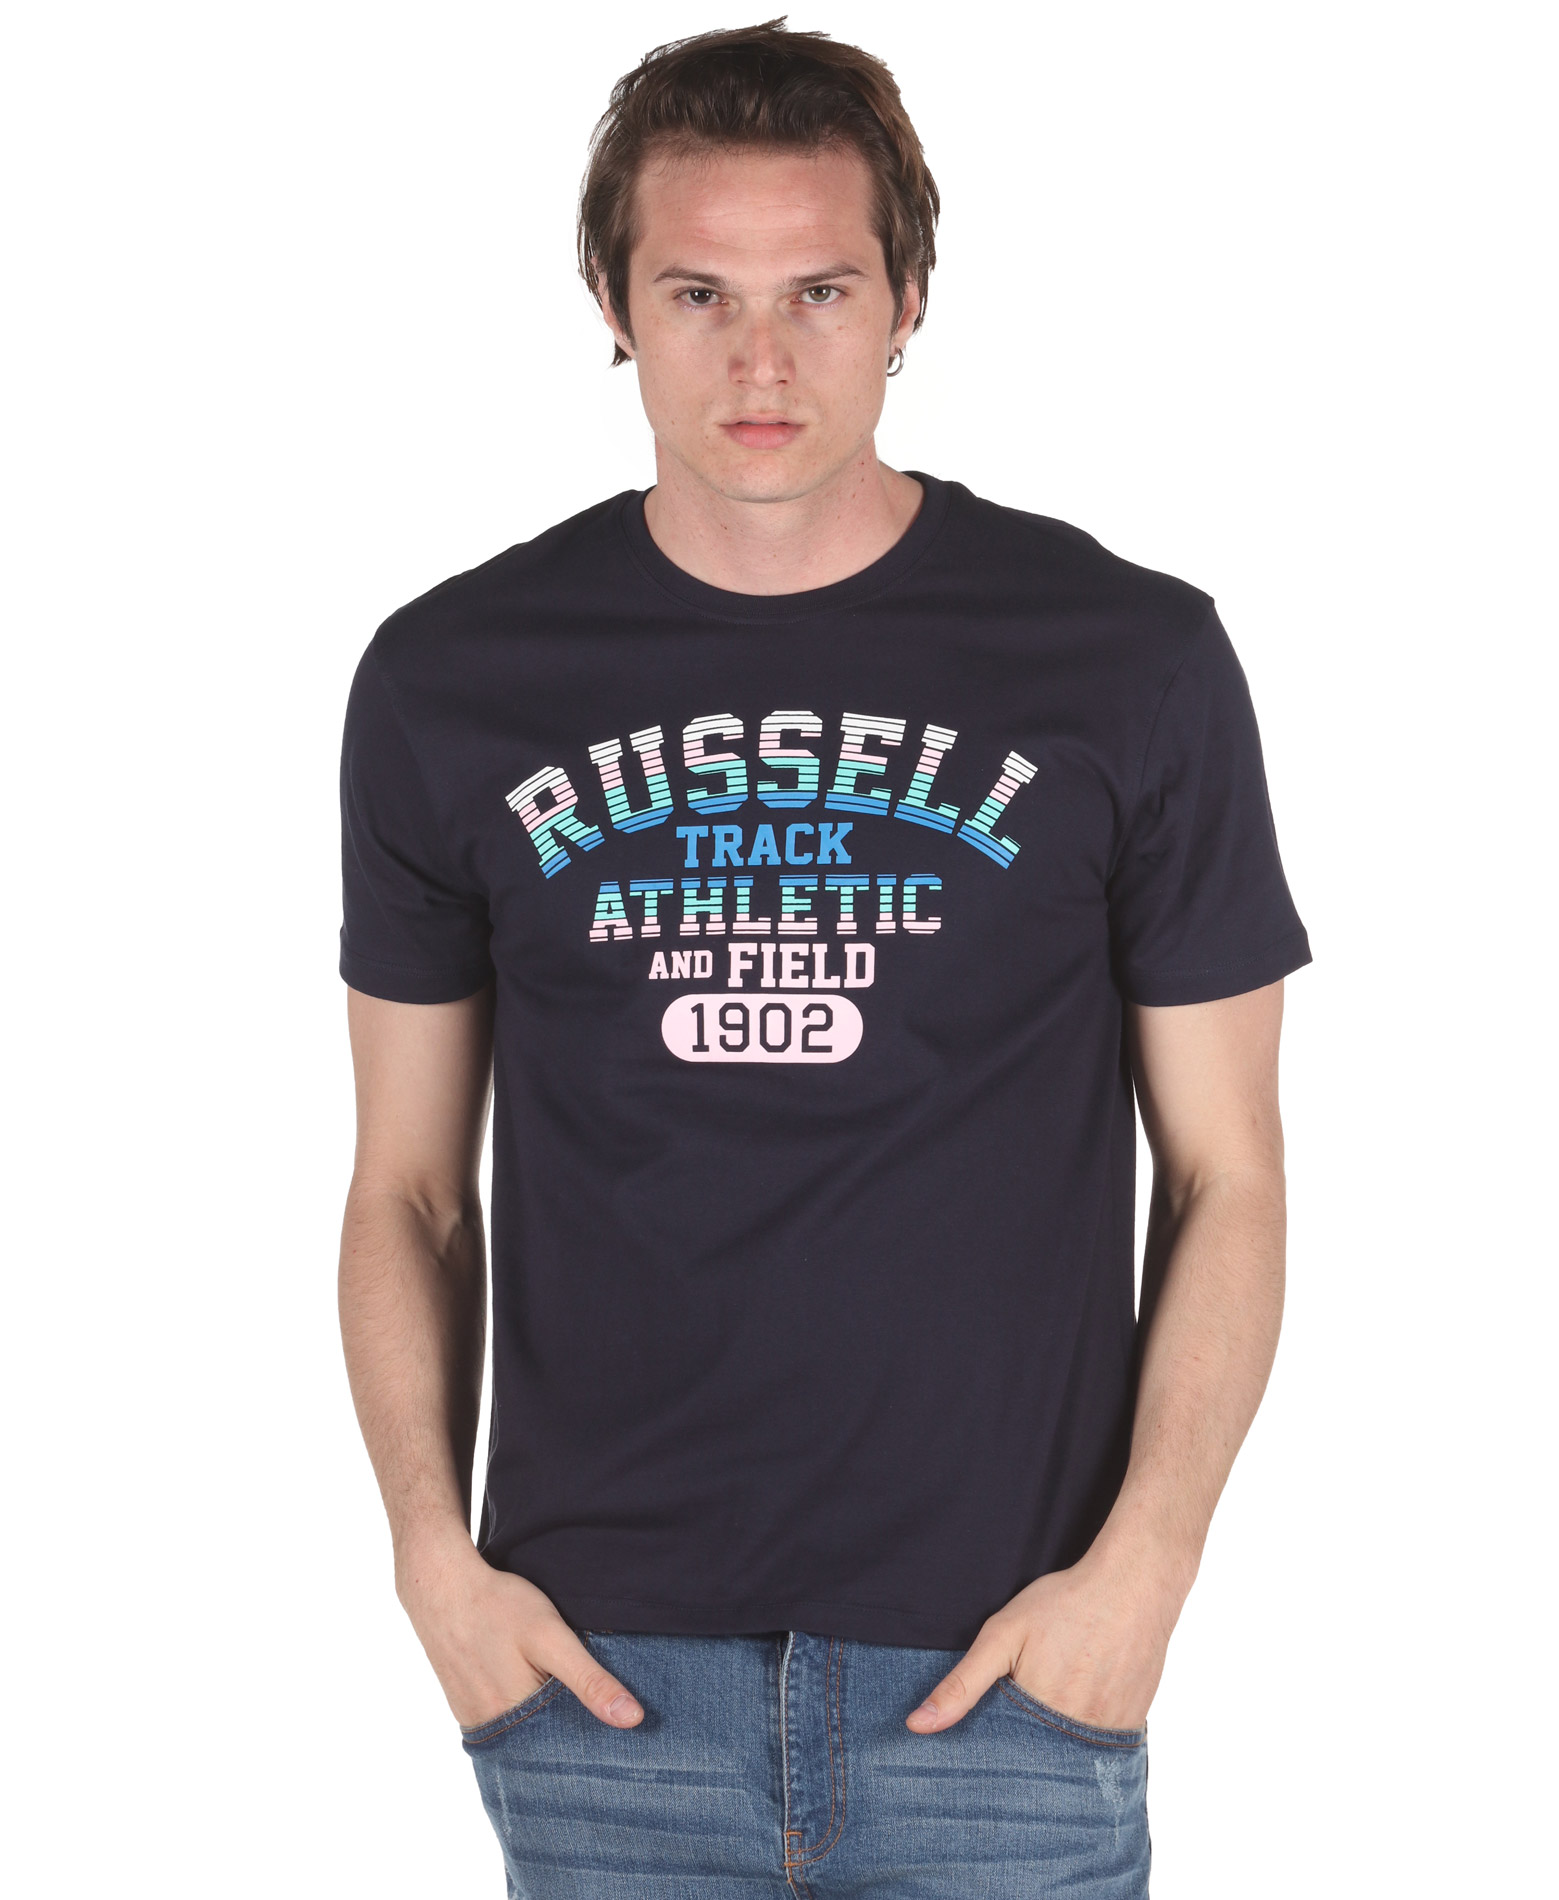 Russell Athletic MEN'S TEE A0-065-1-190 Μπλε